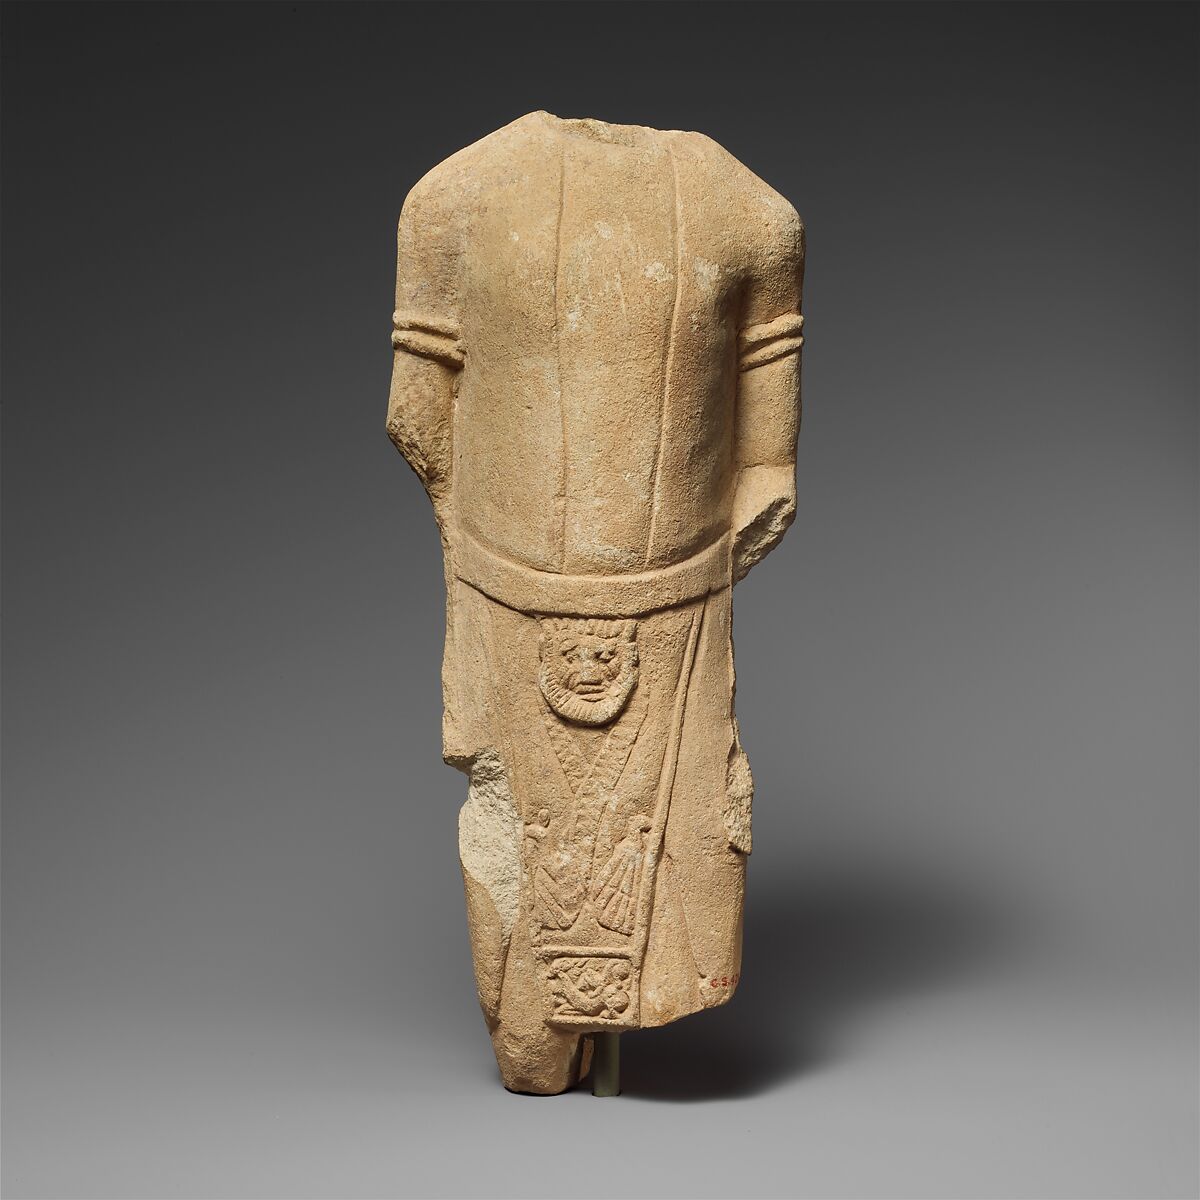 Limestone statuette of a male votary in Egyptianizing dress, Limestone, Cypriot 